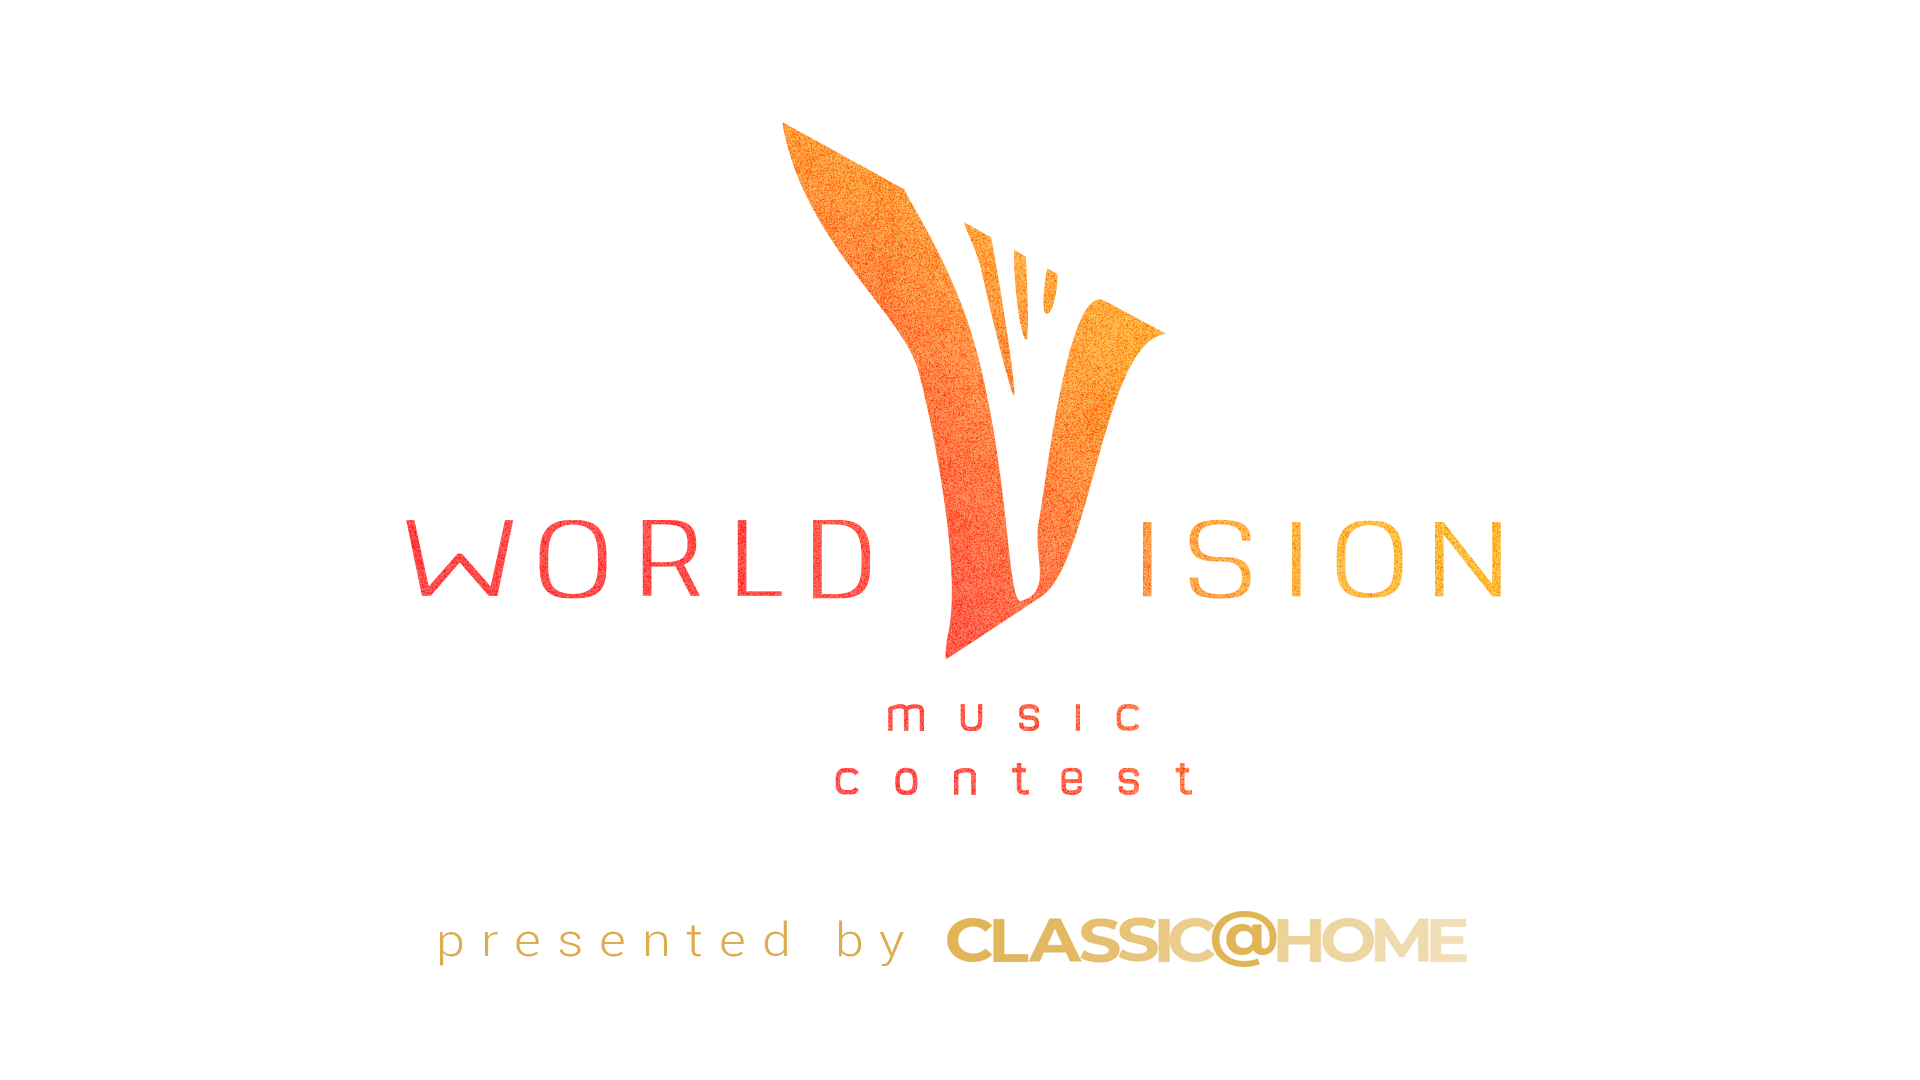 Worldvision Contest: International music competition online